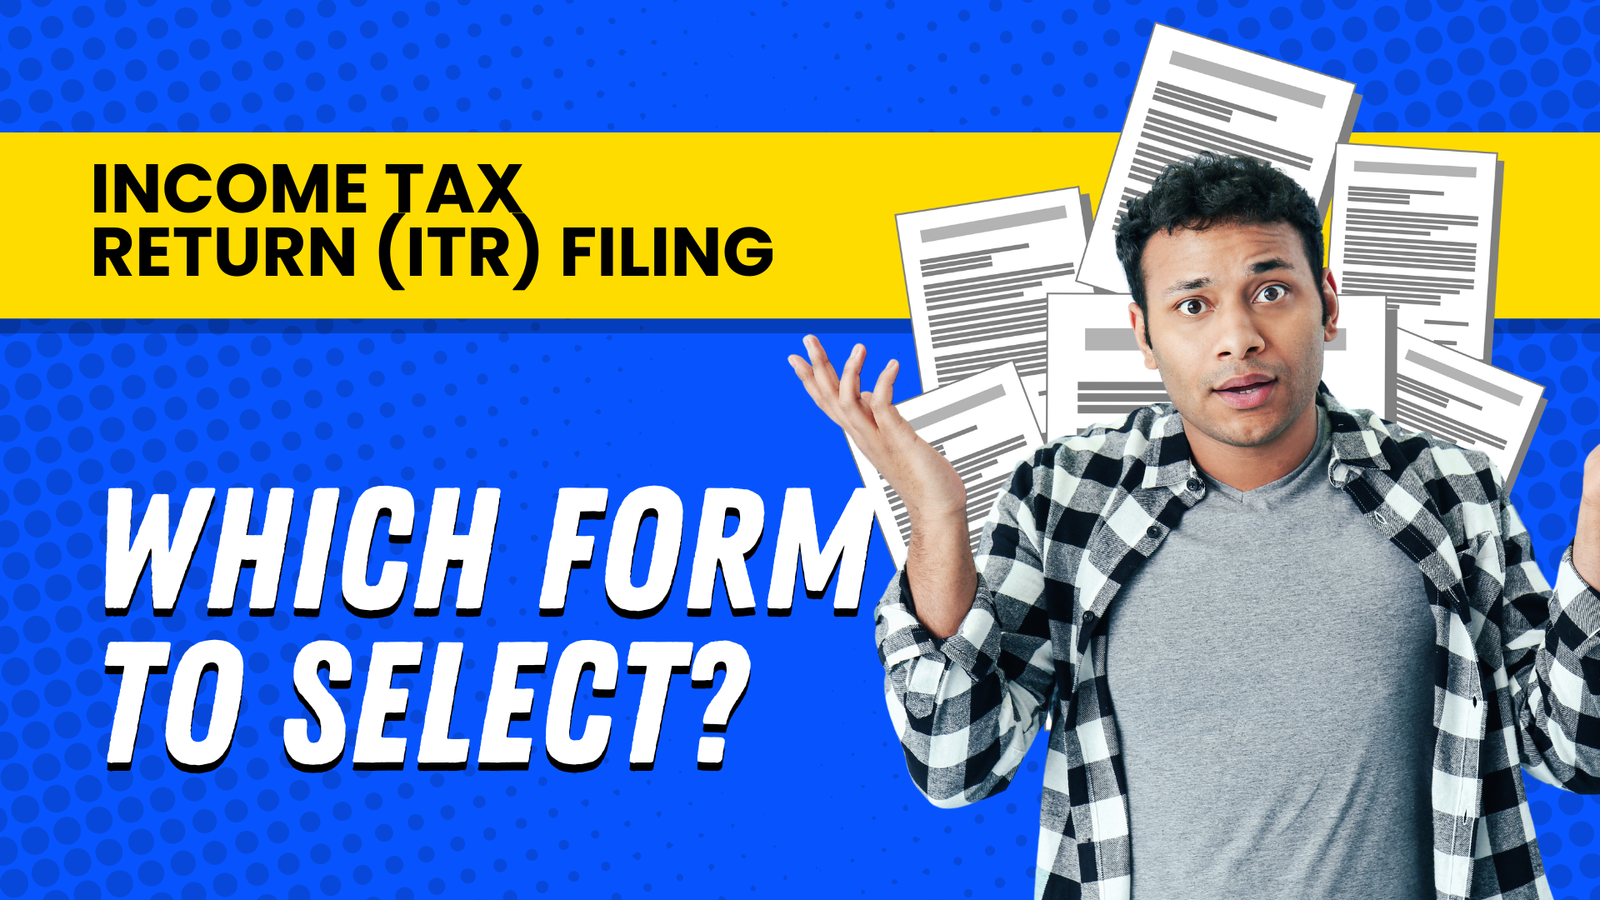 Income Tax Returns and its Types | ITR Filing | LawWiser